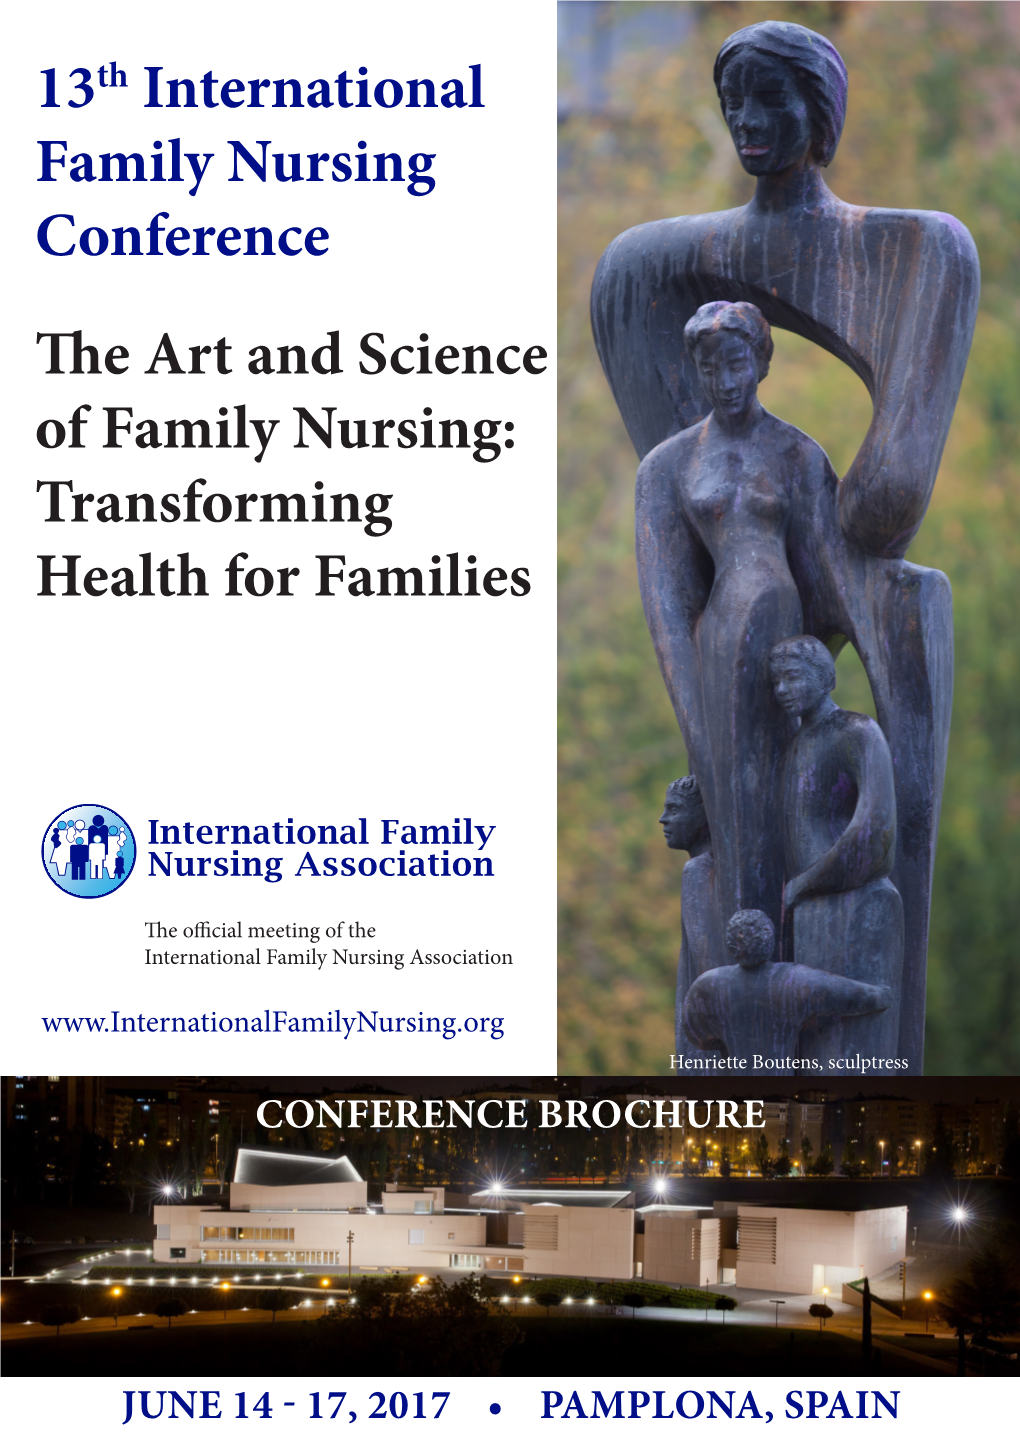 13Th International Family Nursing Conference the Art and Science of Family Nursing: Transforming Health for Families